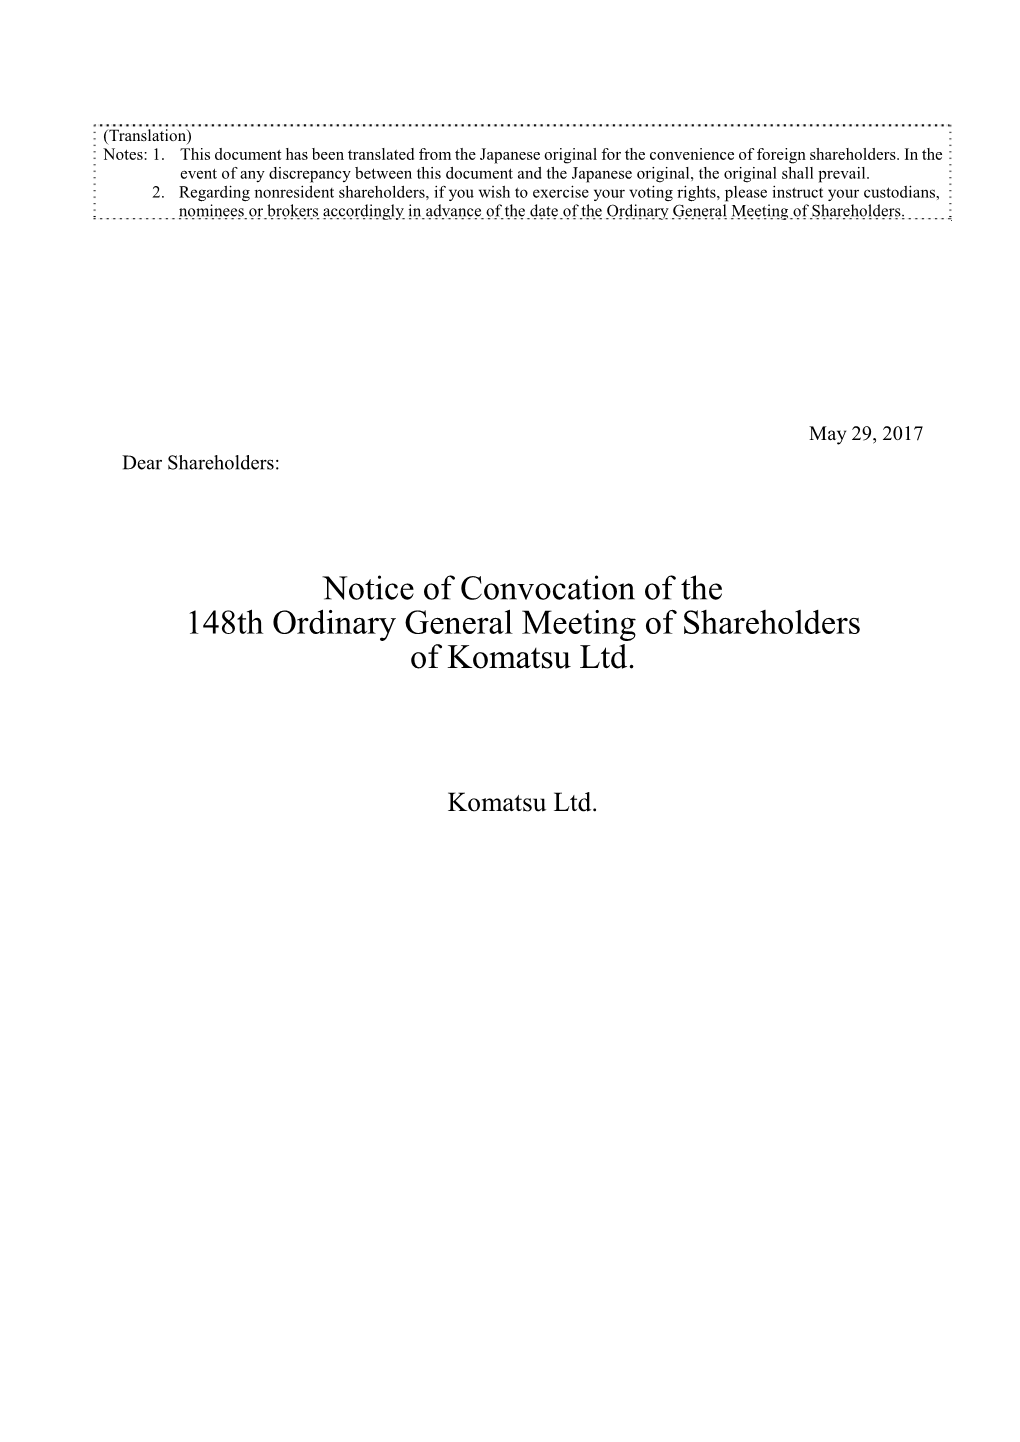 Notice of Convocation of the 148Th Ordinary General Meeting of Shareholders of Komatsu Ltd